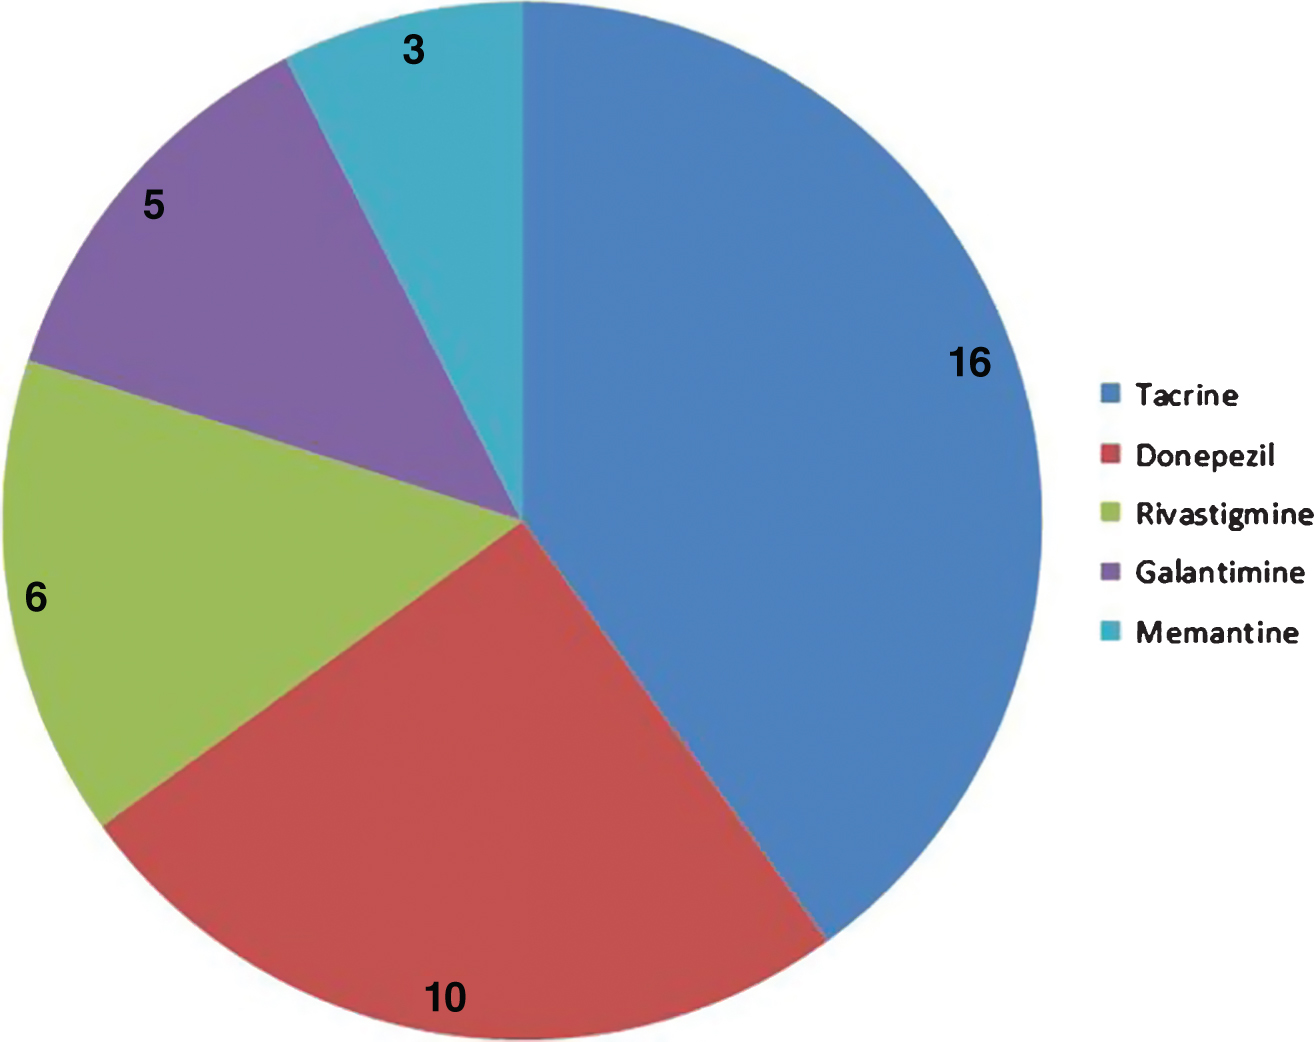 Distribution of common targets between cyclosporine and five AD approved drugs. The pie chart shows the number of targets that cyclosporine shares with 5 different approved AD drugs.